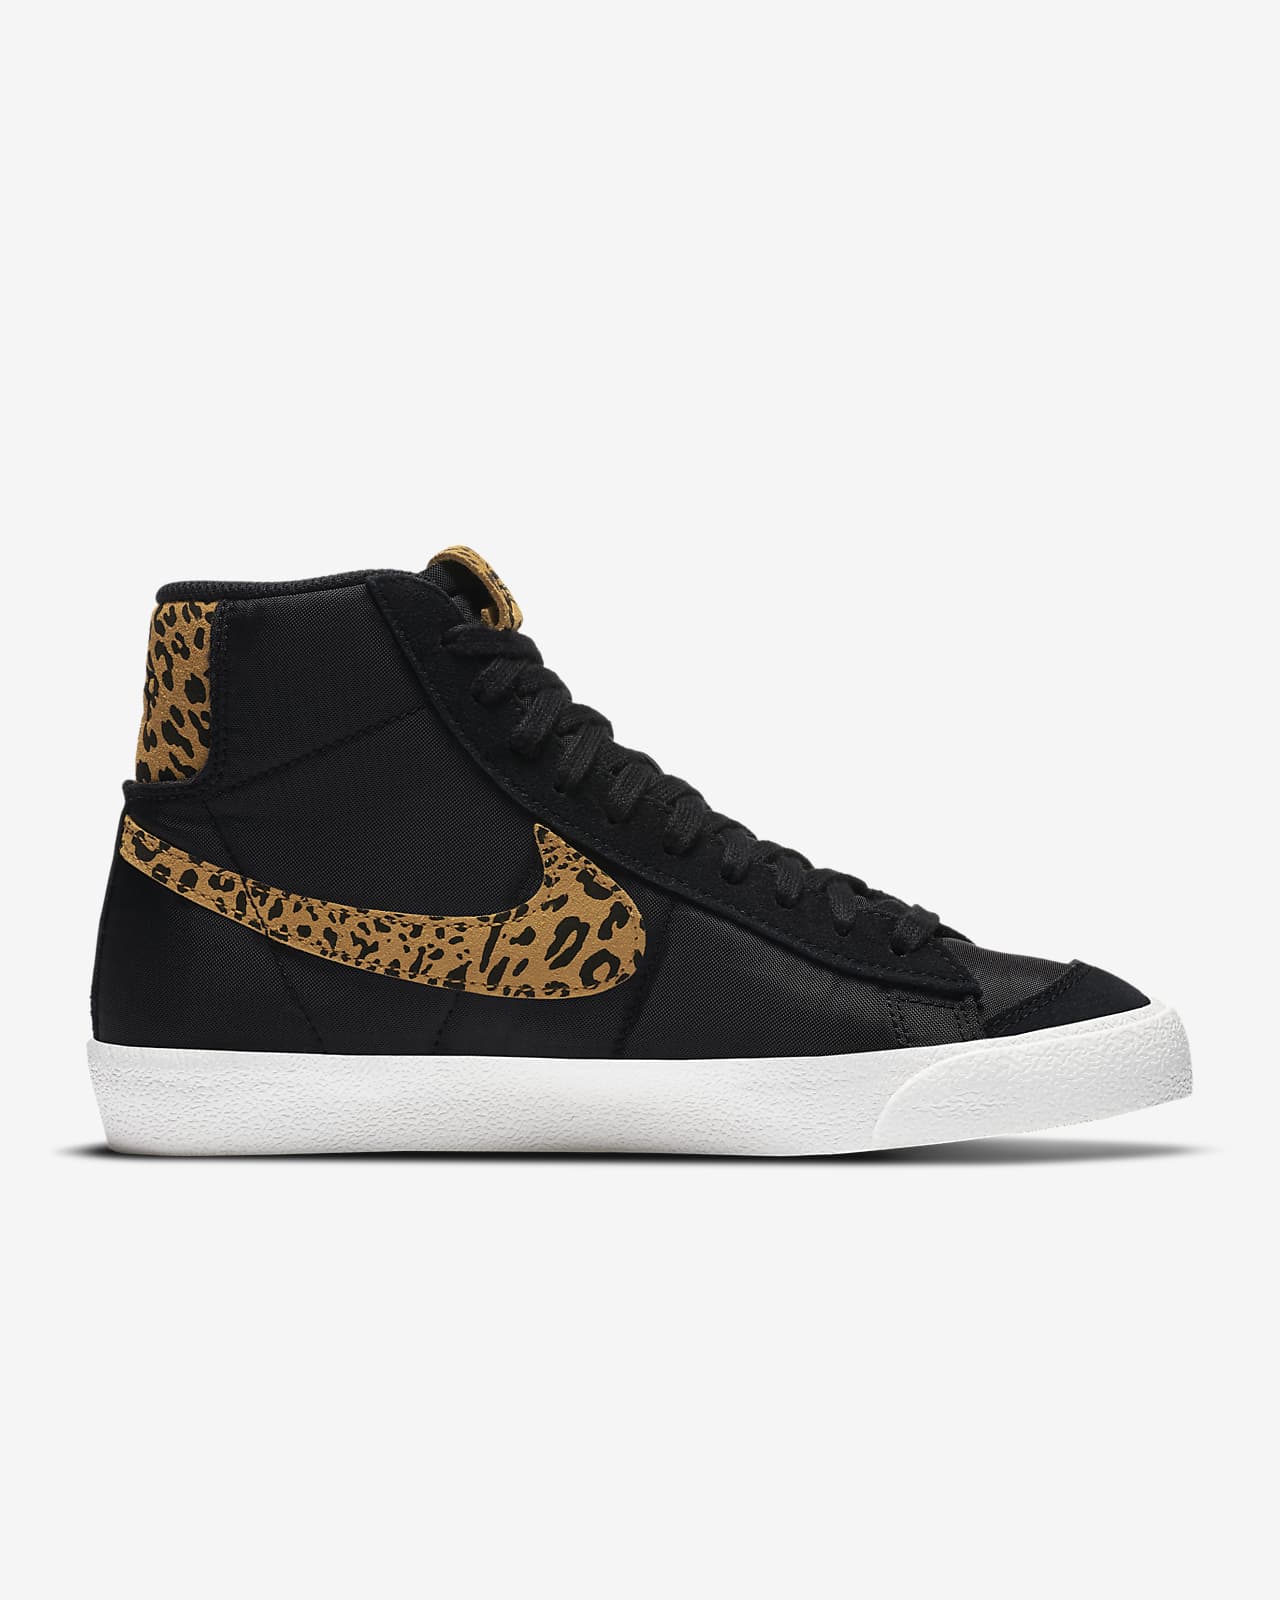 womens nike shoes with leopard print